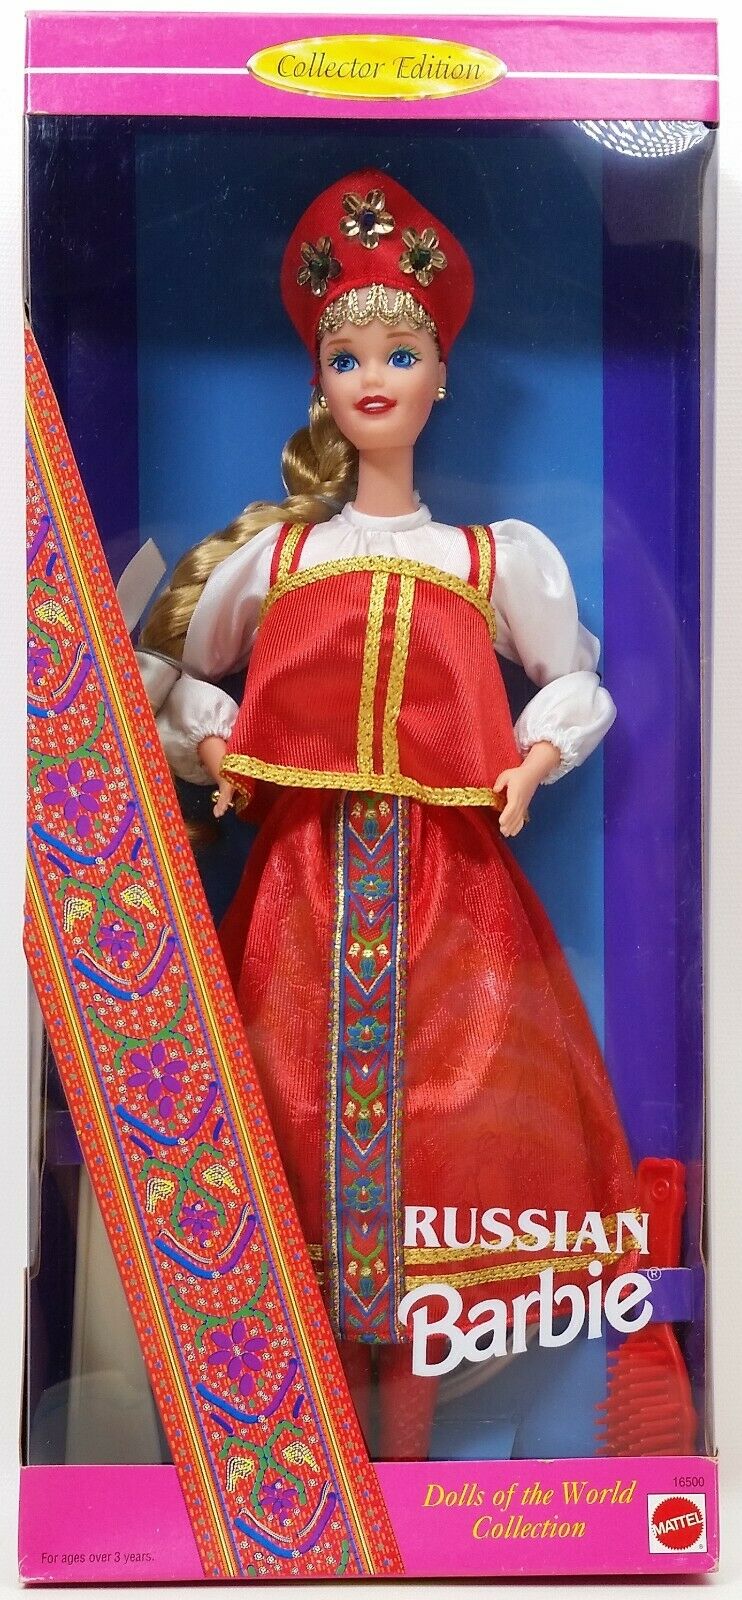 1996_russian_barbie_dolls_of_the_world_collection.jpg